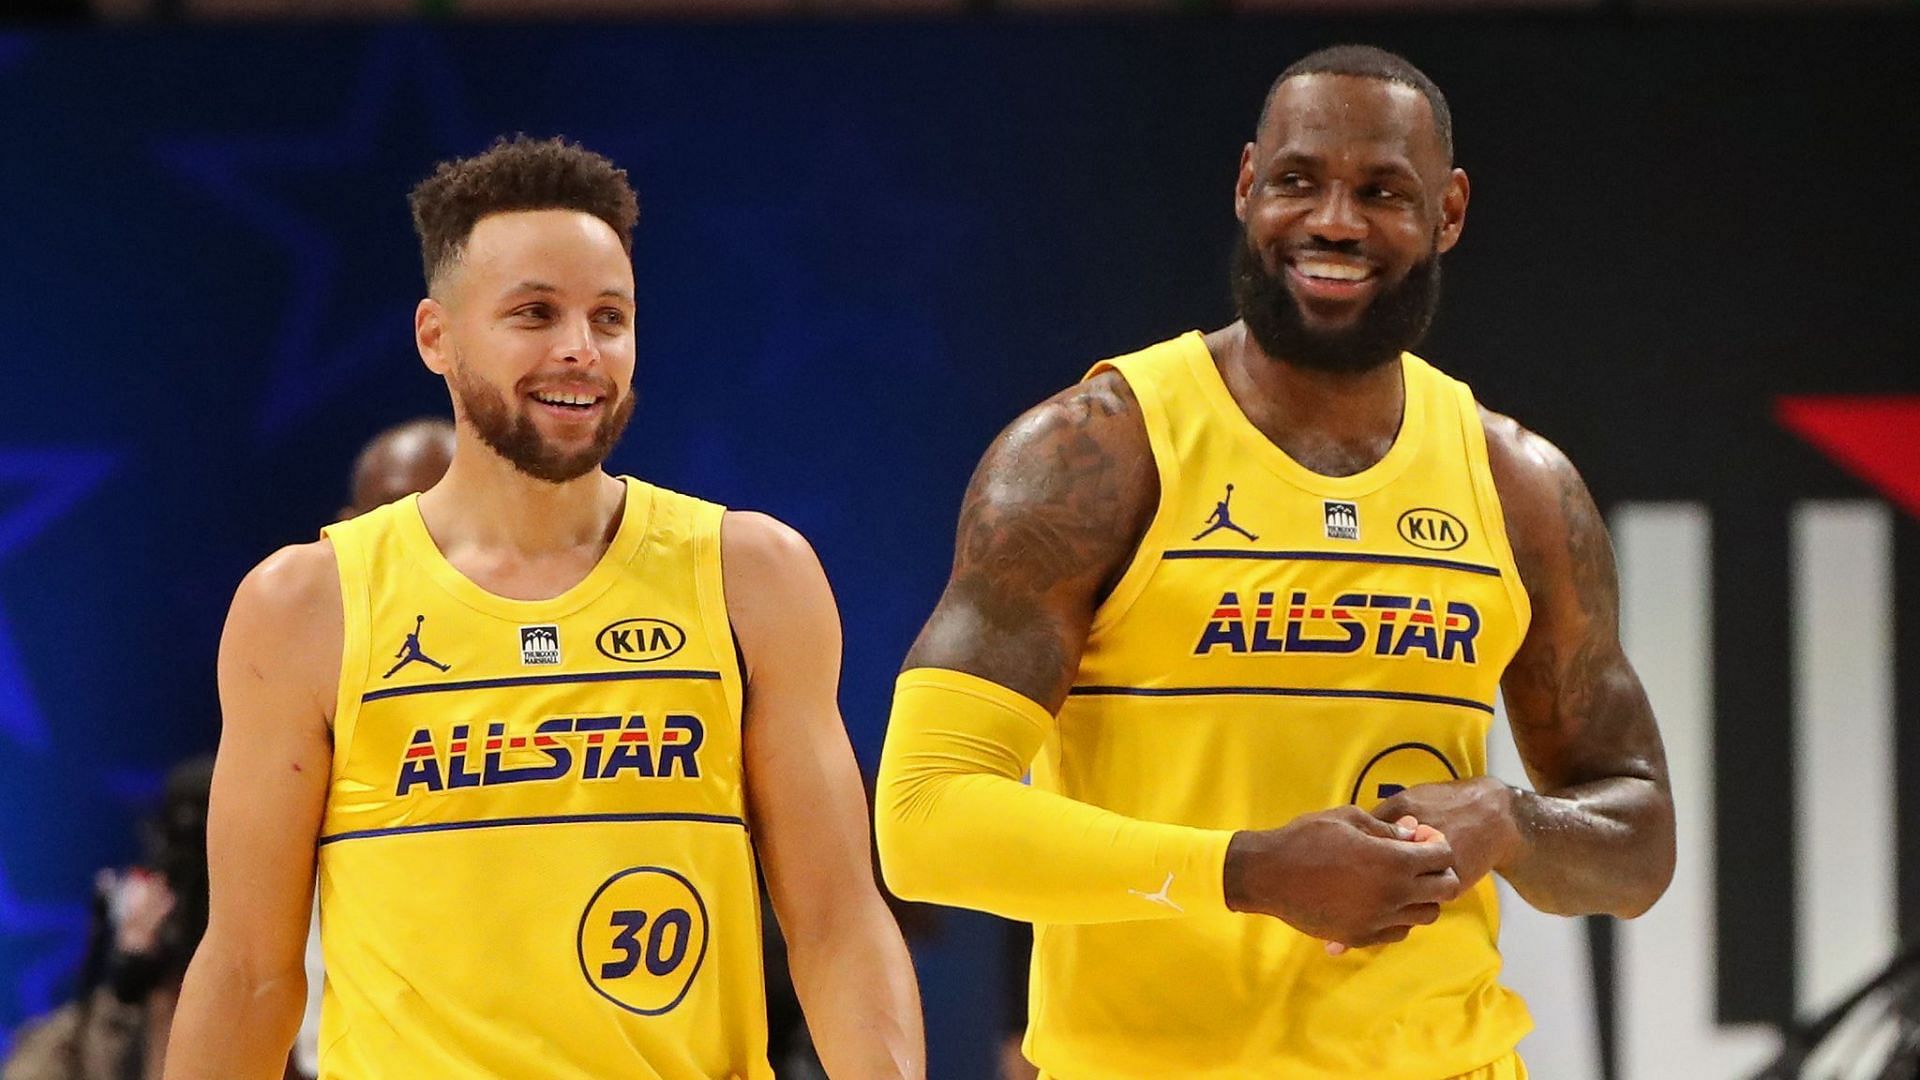 Steph Curry of the Golden State Warriors and LeBron James of the LA Lakers during the 2021 NBA All-Star Game